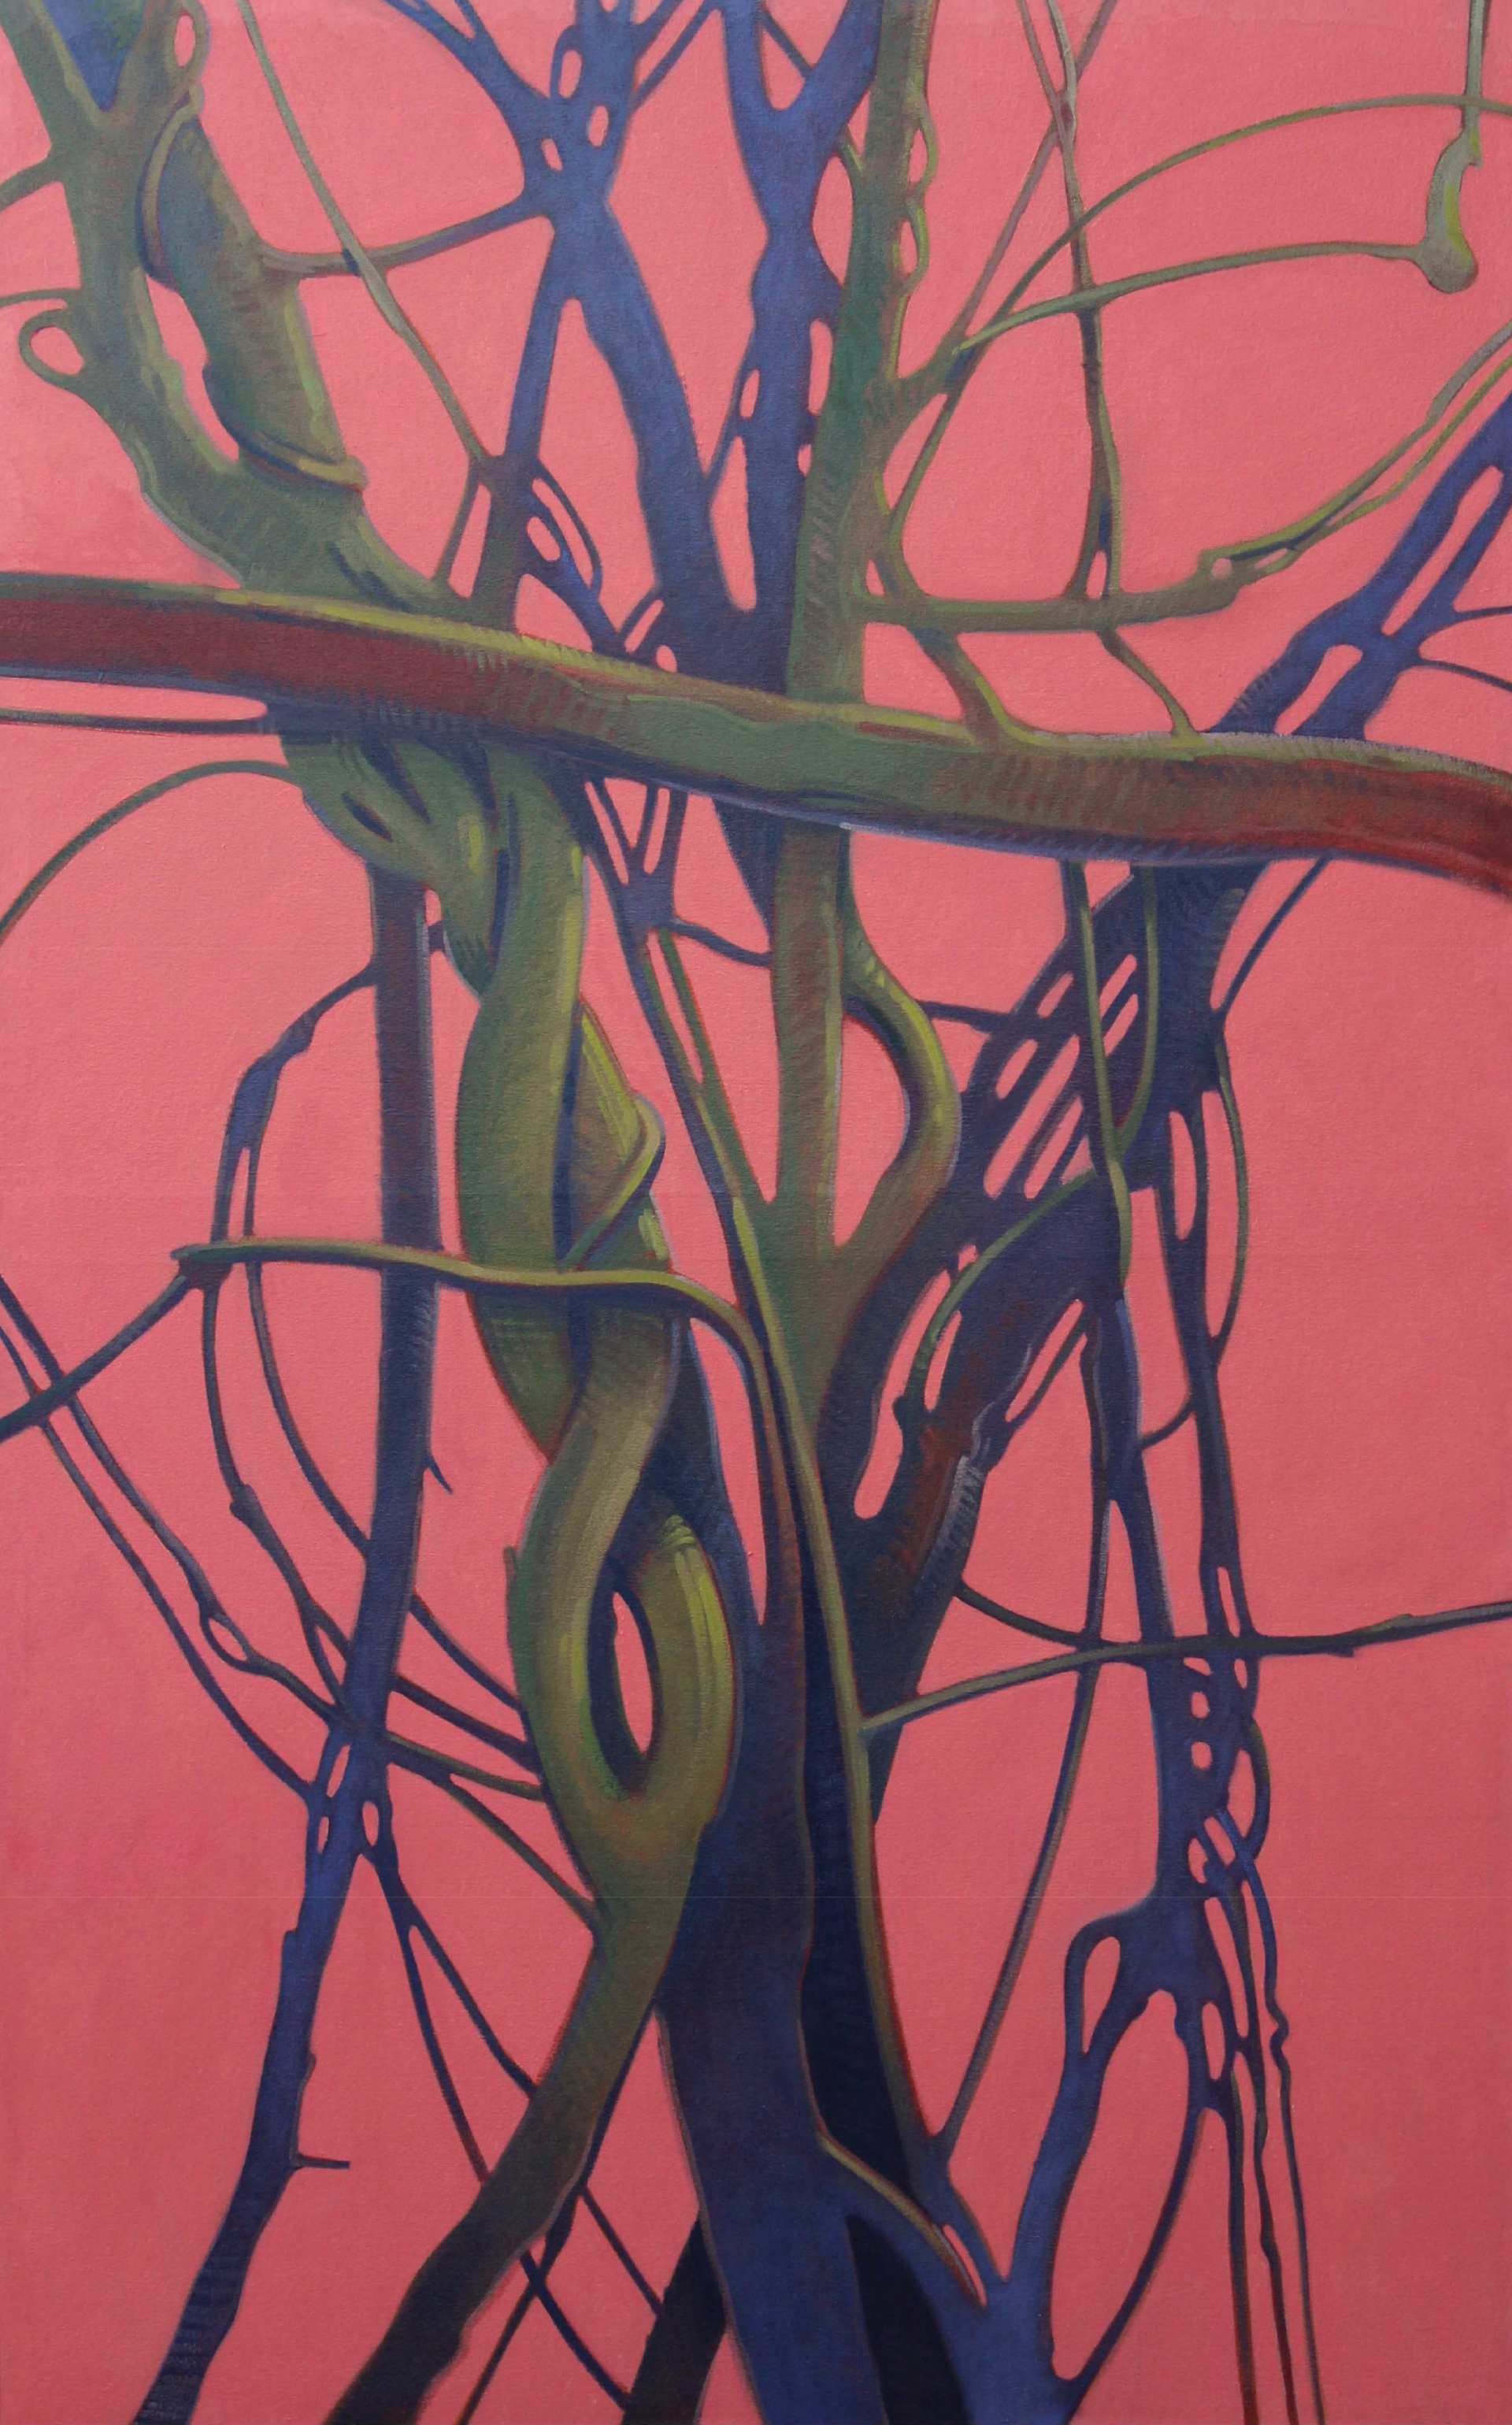 Vines # 12 by George Martin